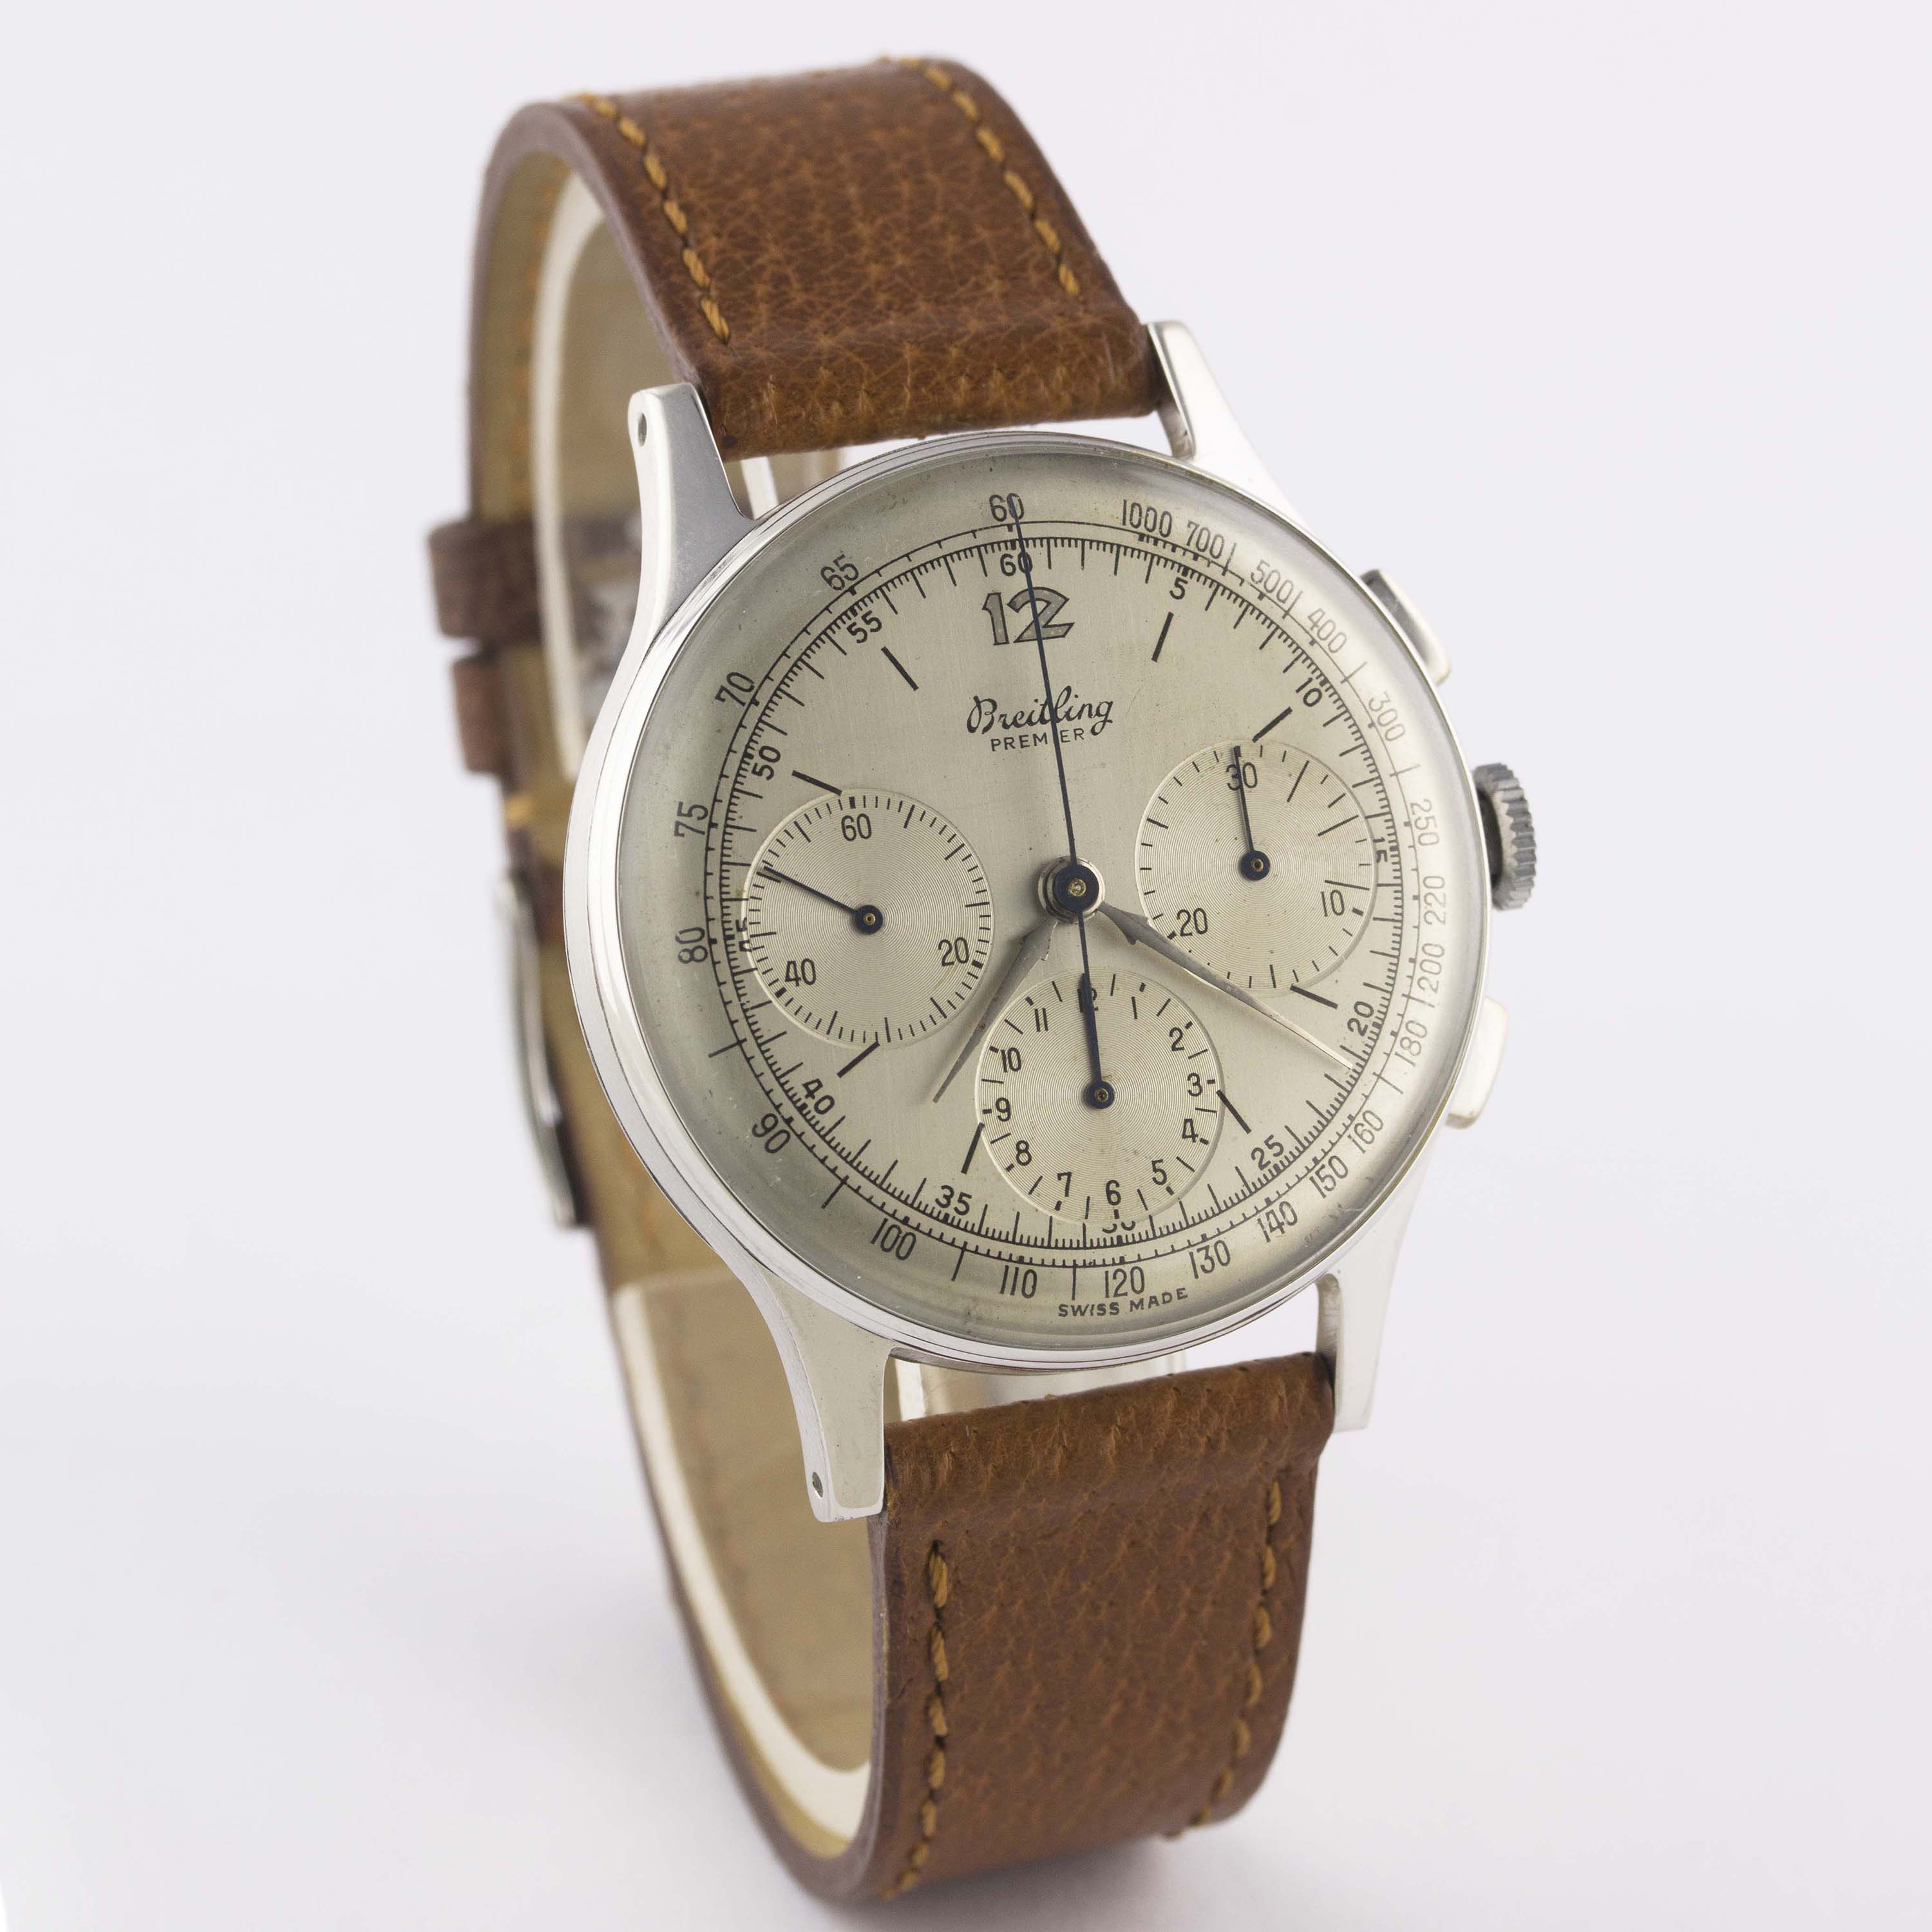 A RARE GENTLEMAN'S LARGE SIZE BREITLING PREMIER CHRONOGRAPH WRIST WATCH CIRCA 1946, REF. 734 - Image 5 of 9